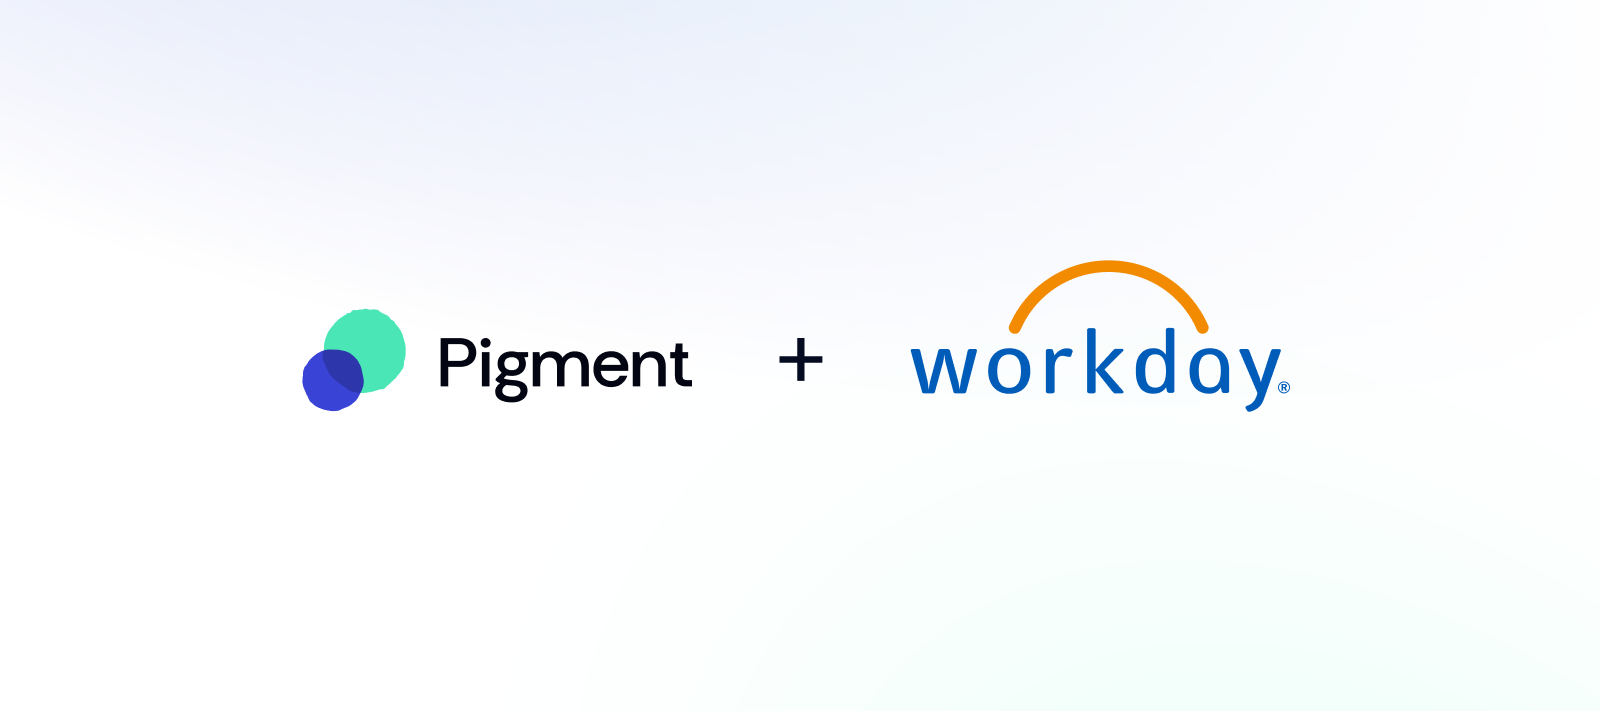 How to export data from Workday to Pigment